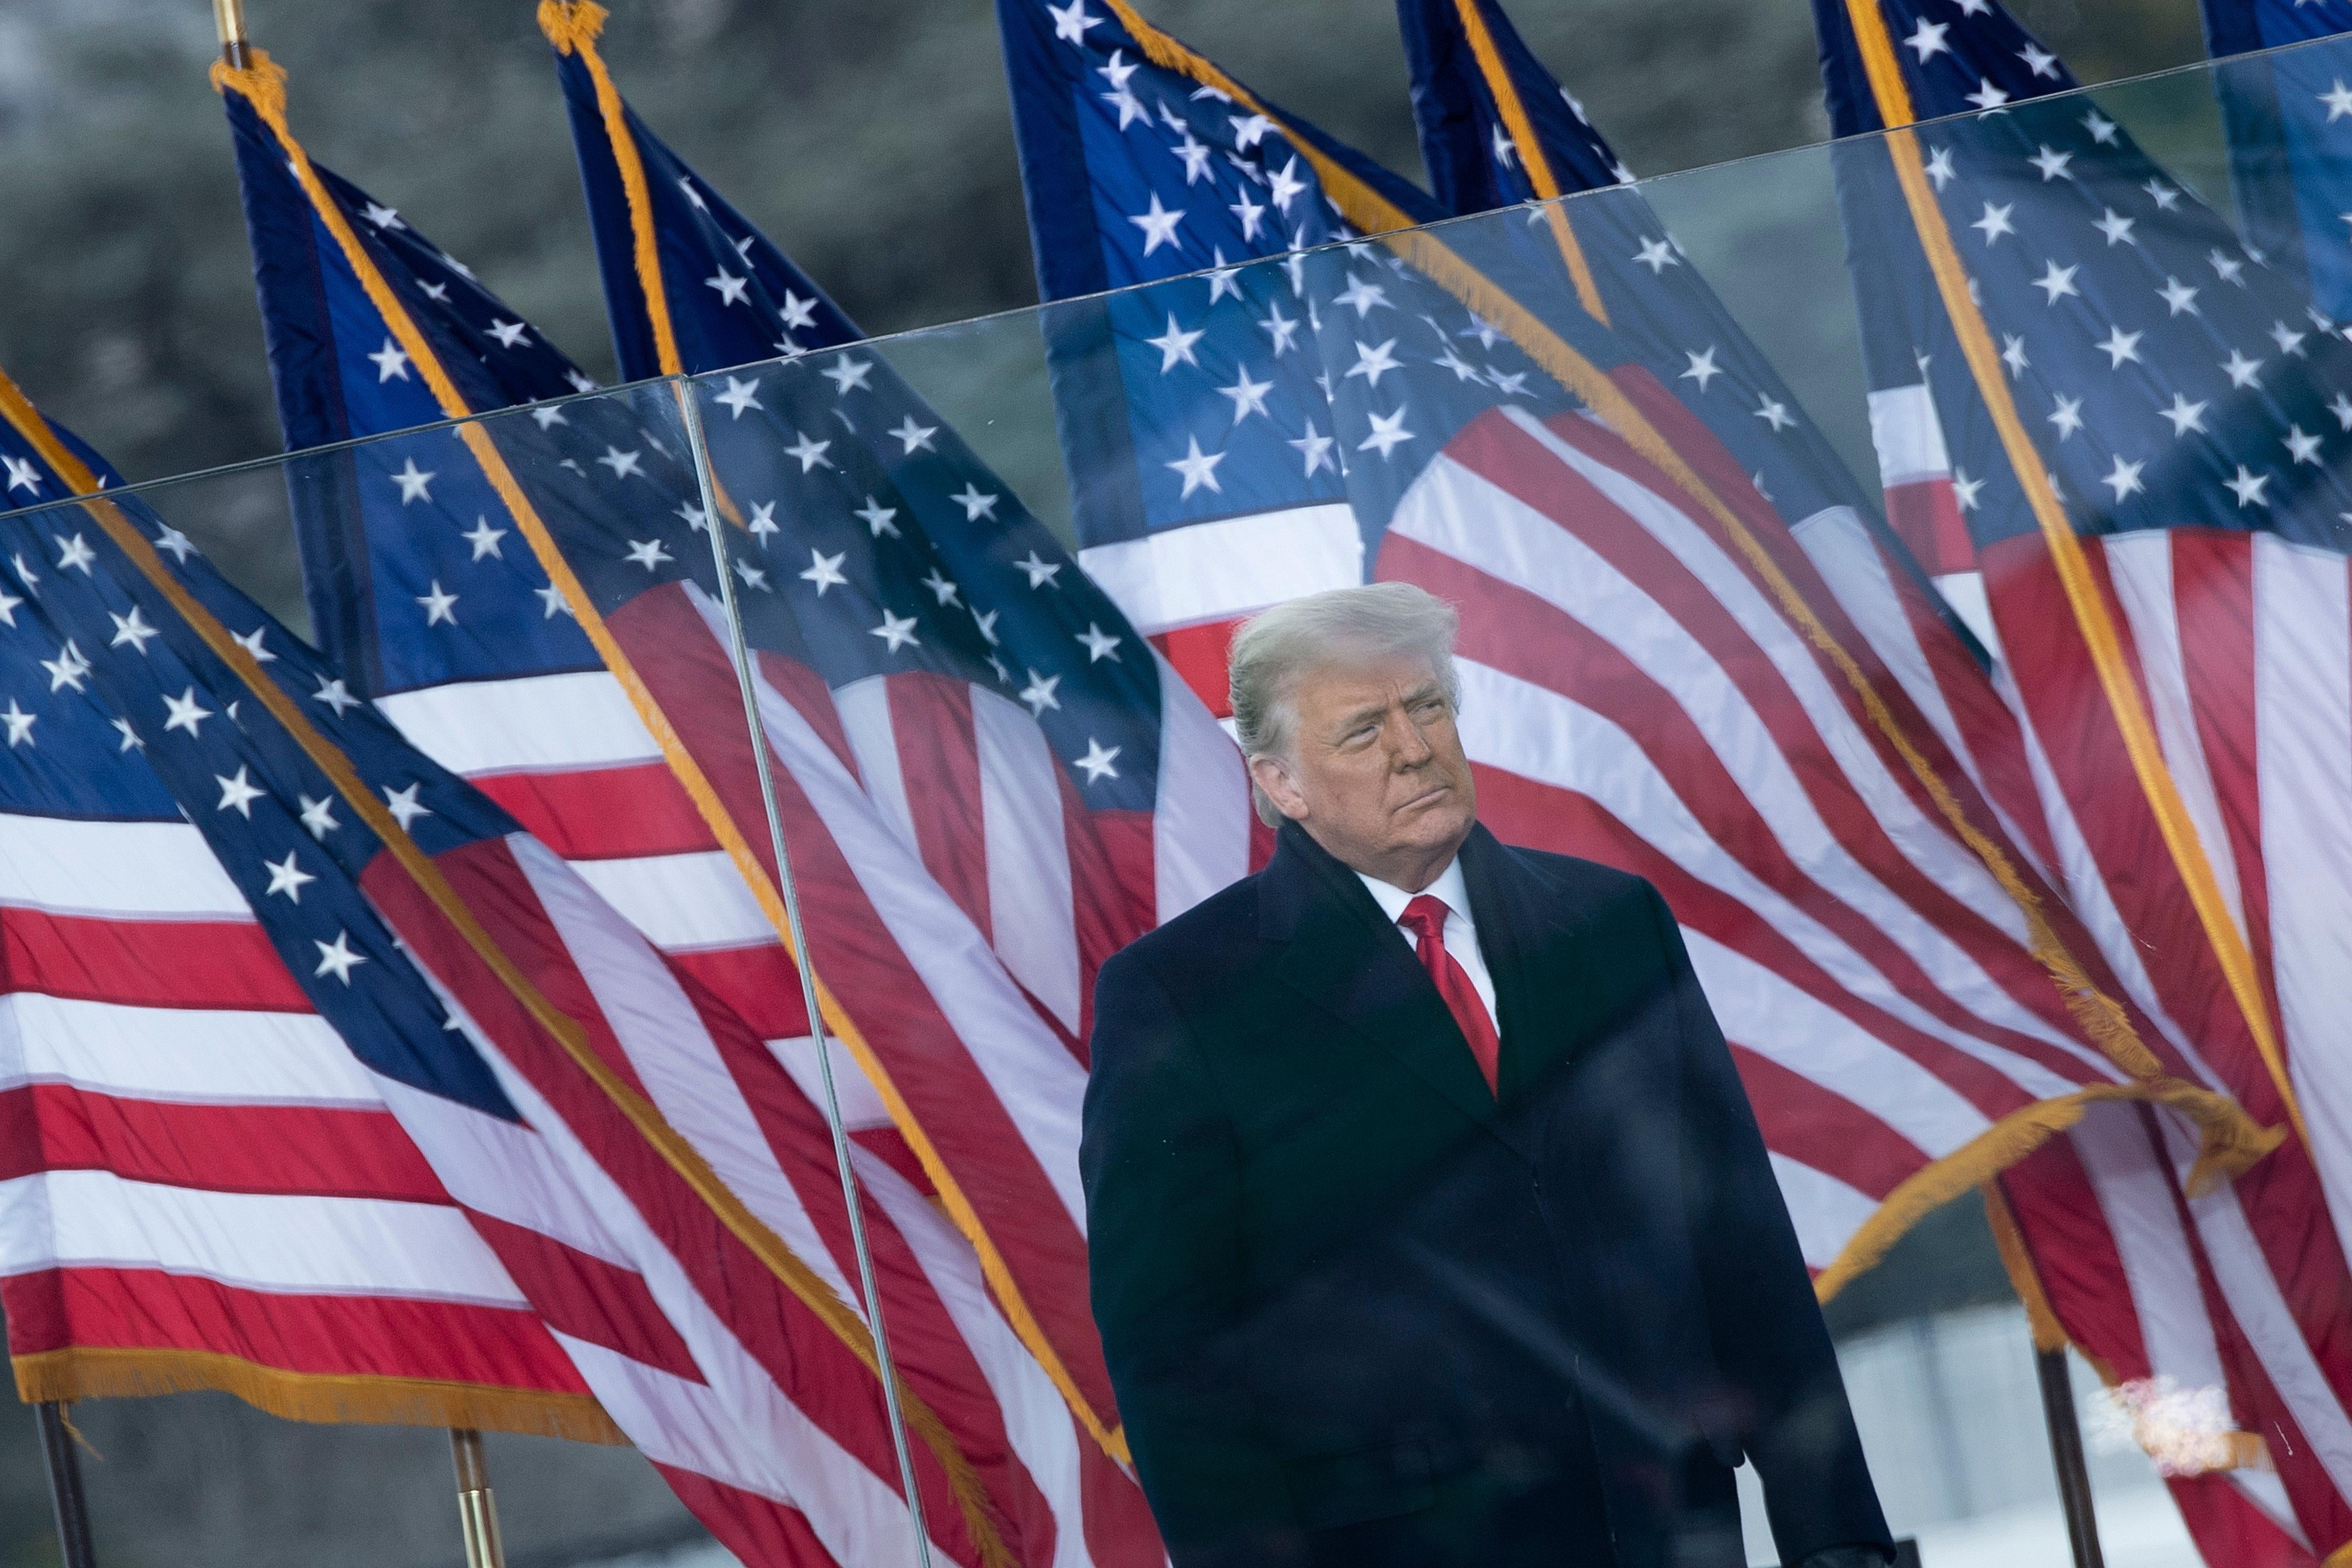 Donald Trump looks stern in an overcoat standing at the Ellipse with a row of American flags behind him